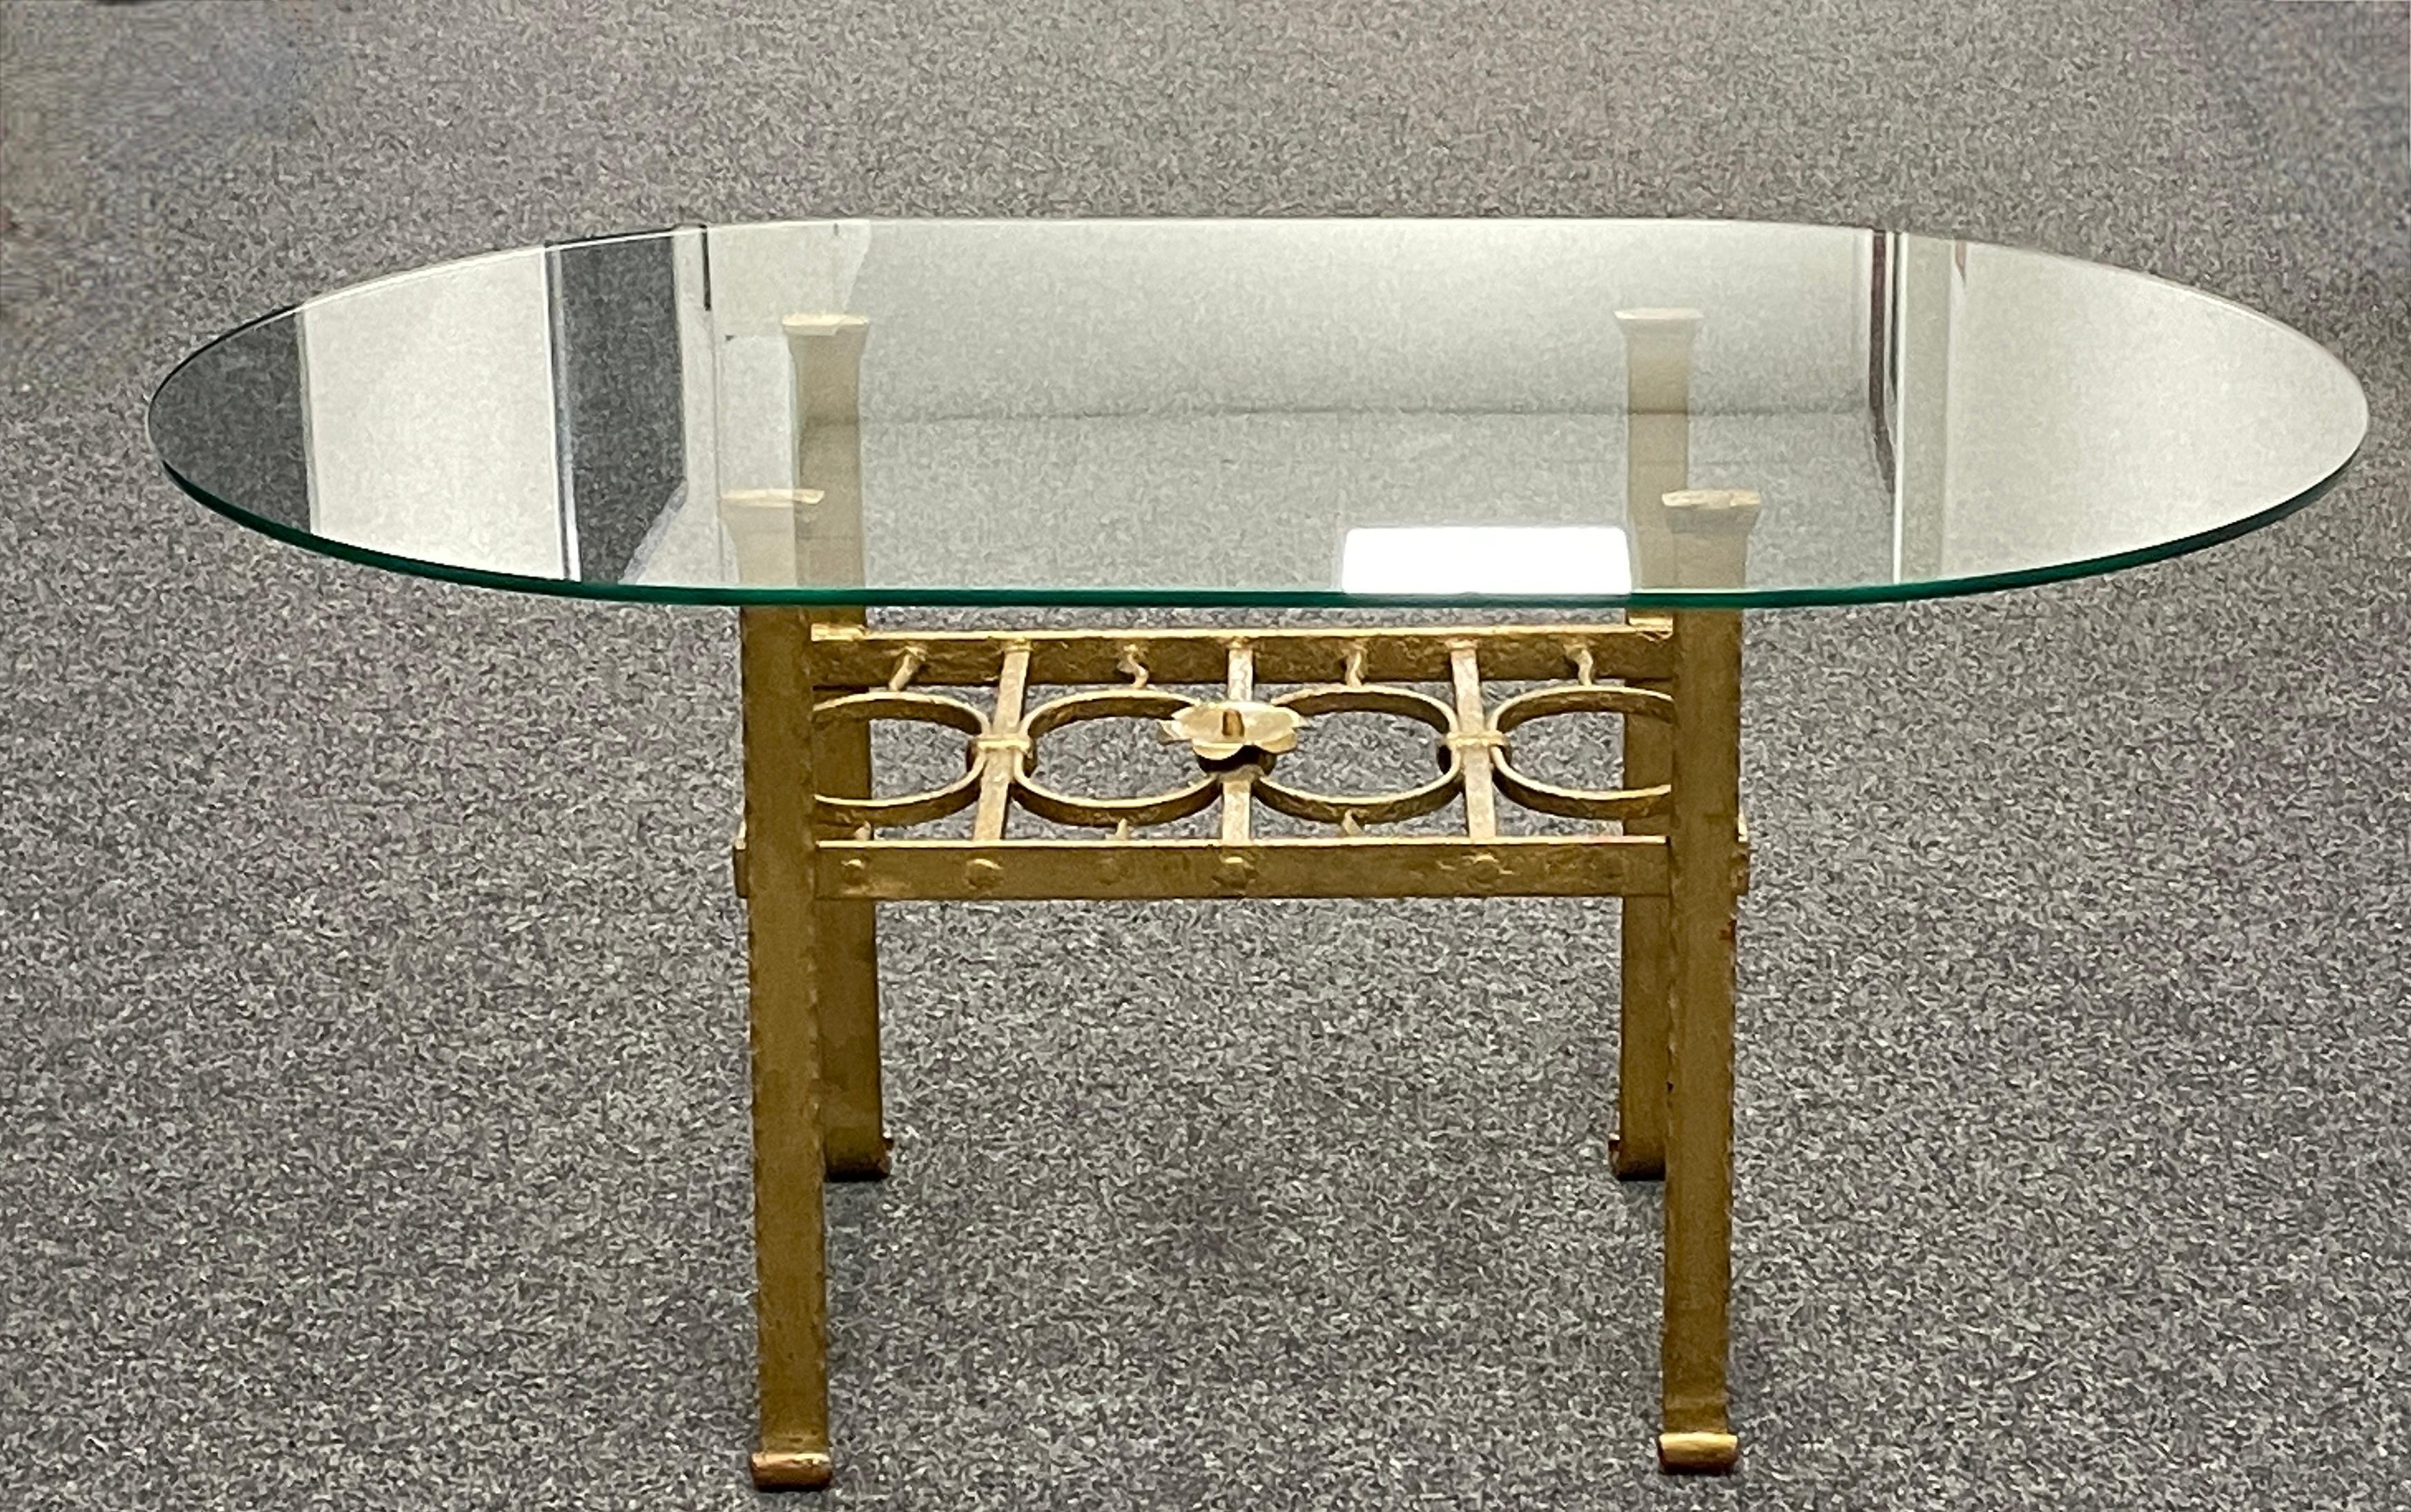 Brutalist Gilt Iron Coffee Table, Tole Toleware Style, German, 1960s For Sale 3